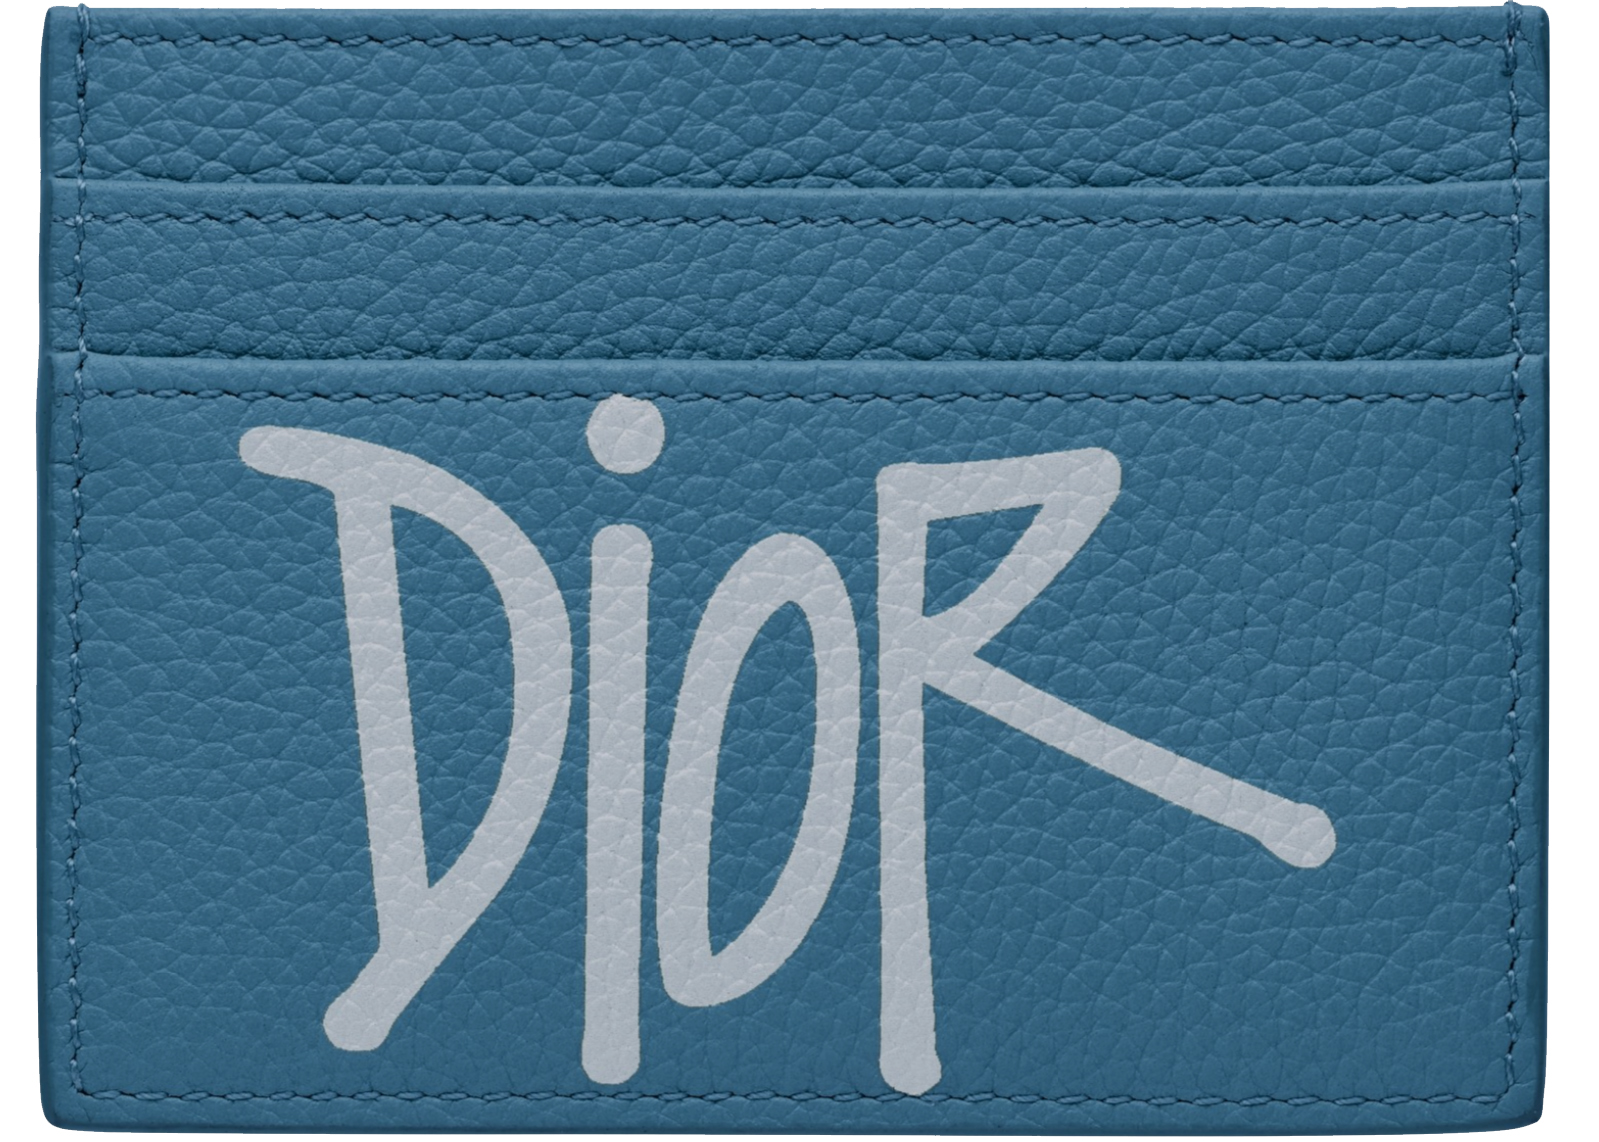 Dior And Shawn Card Holder (4 Card Slot) Navy Blue in Grained 